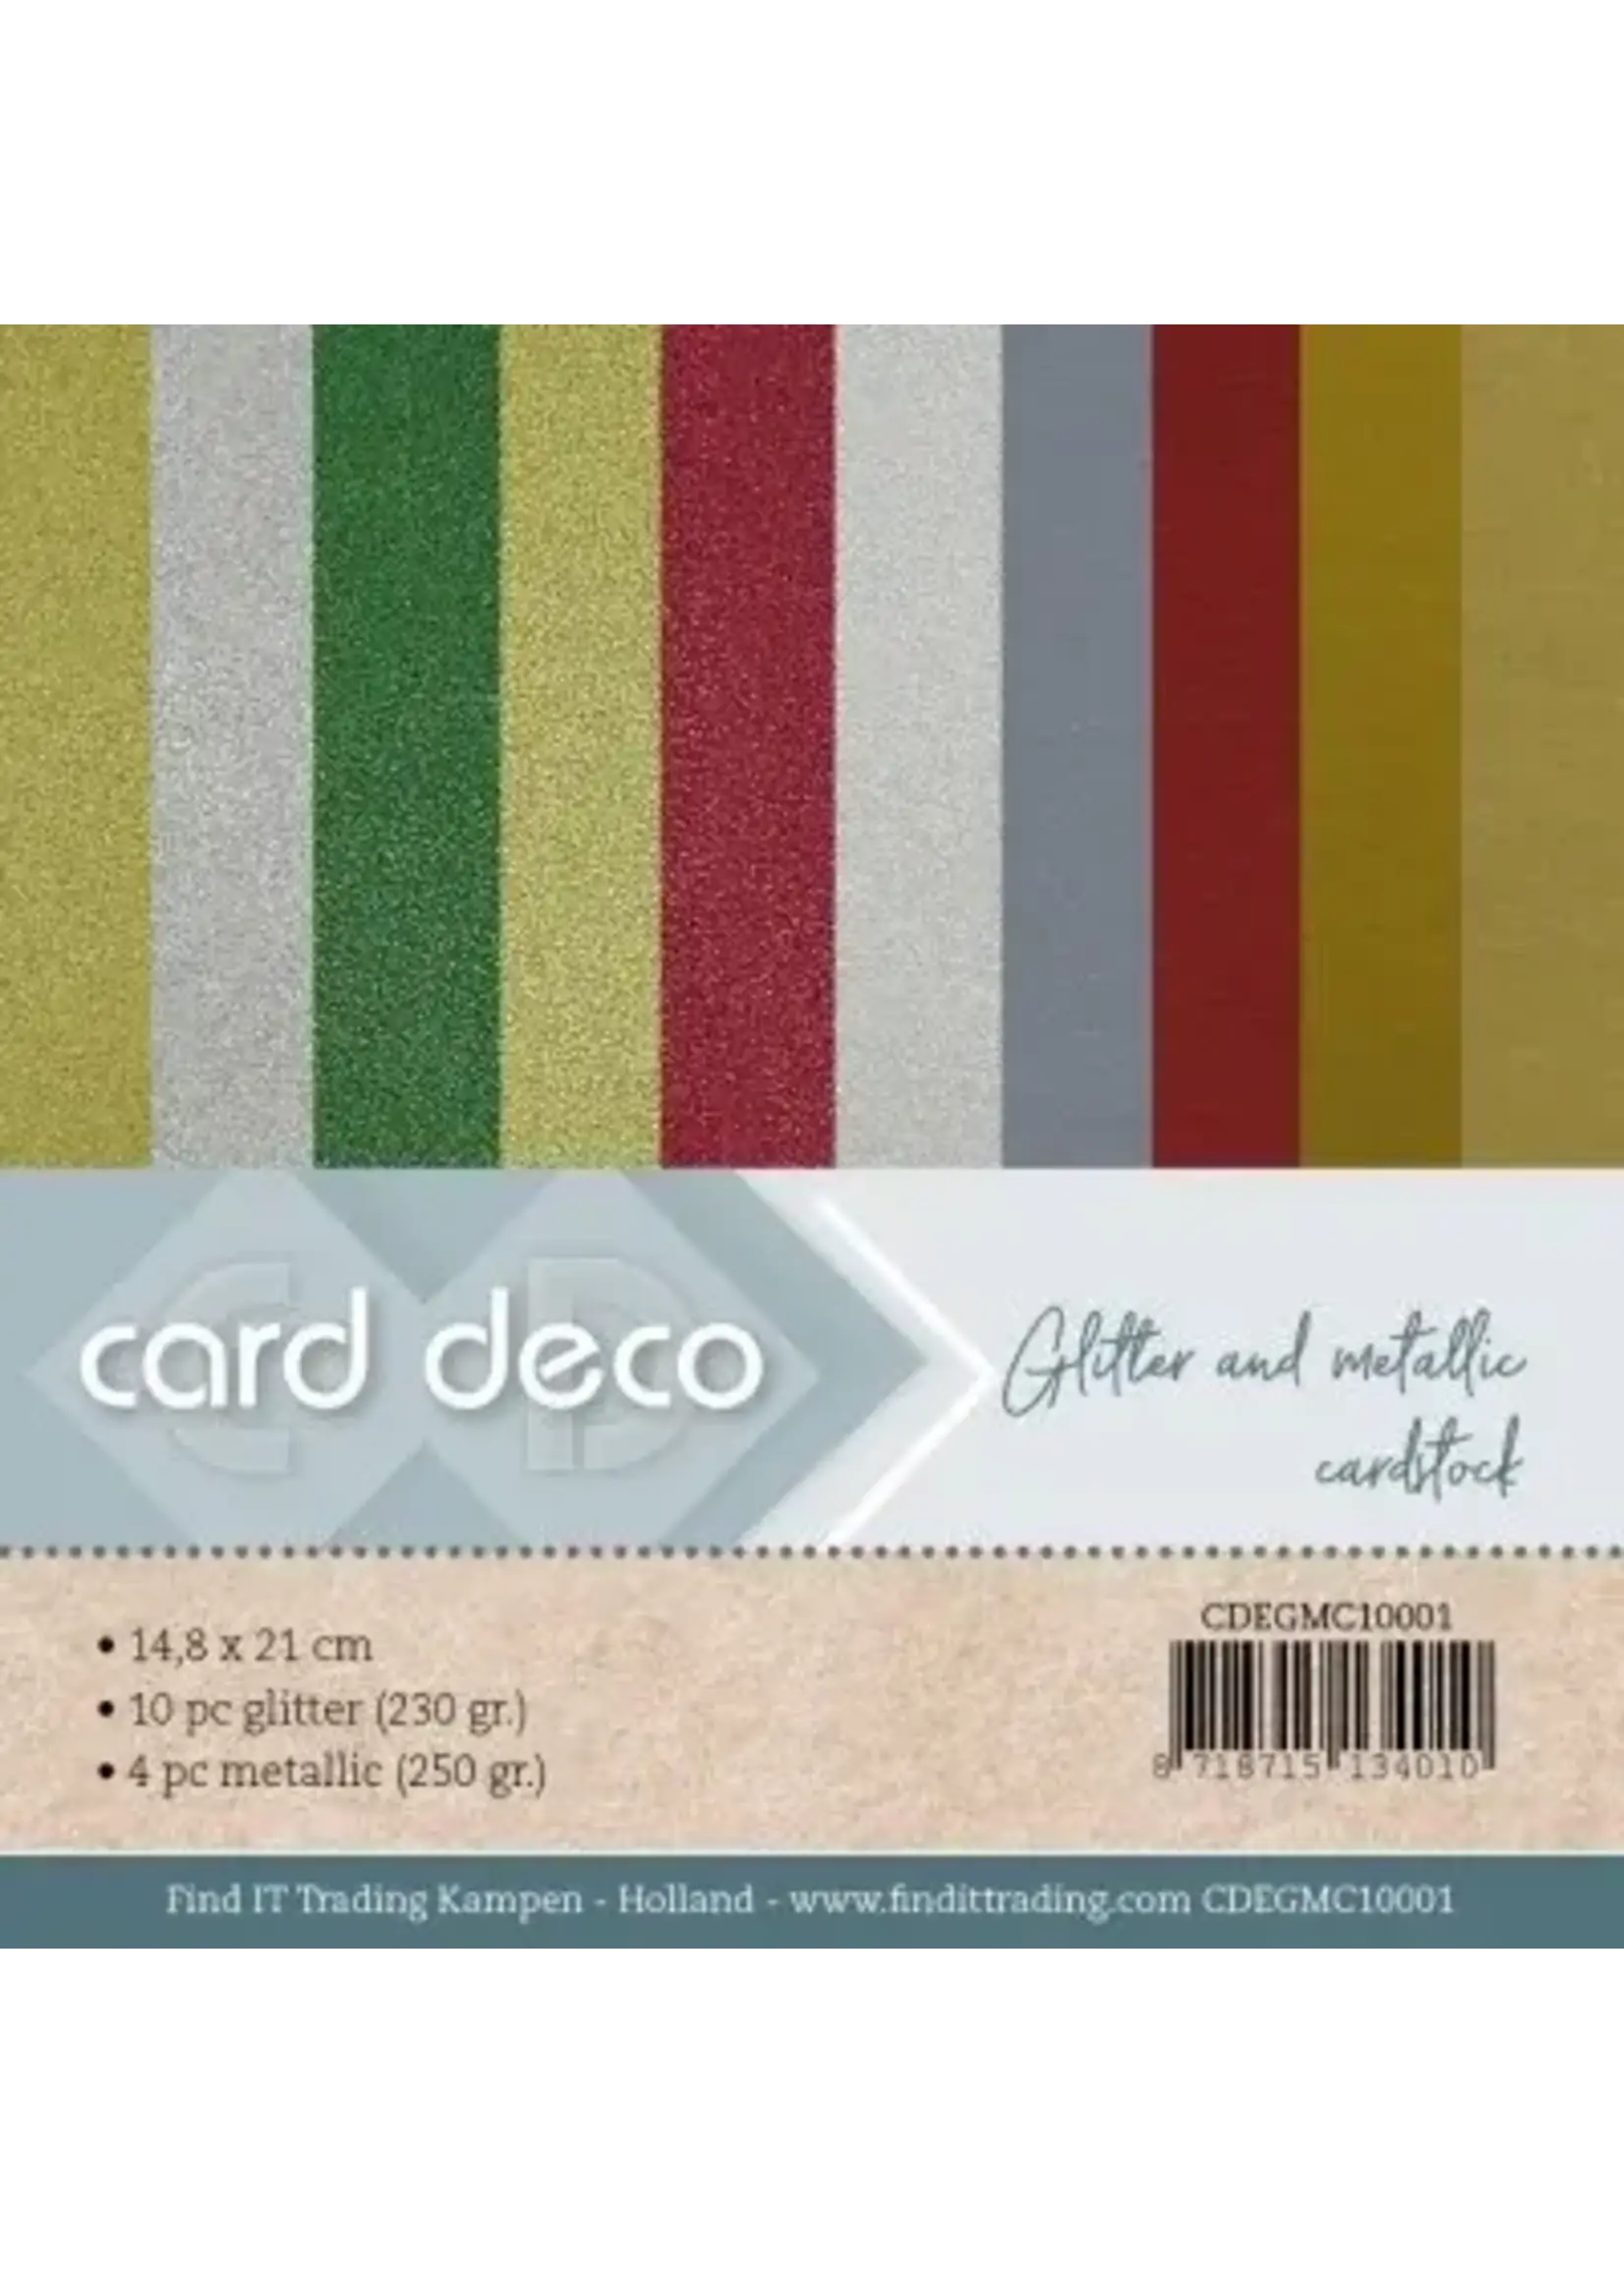 carddeco Card Deco Essentials - Glitter And Metallic Cardstock - Christmas A5